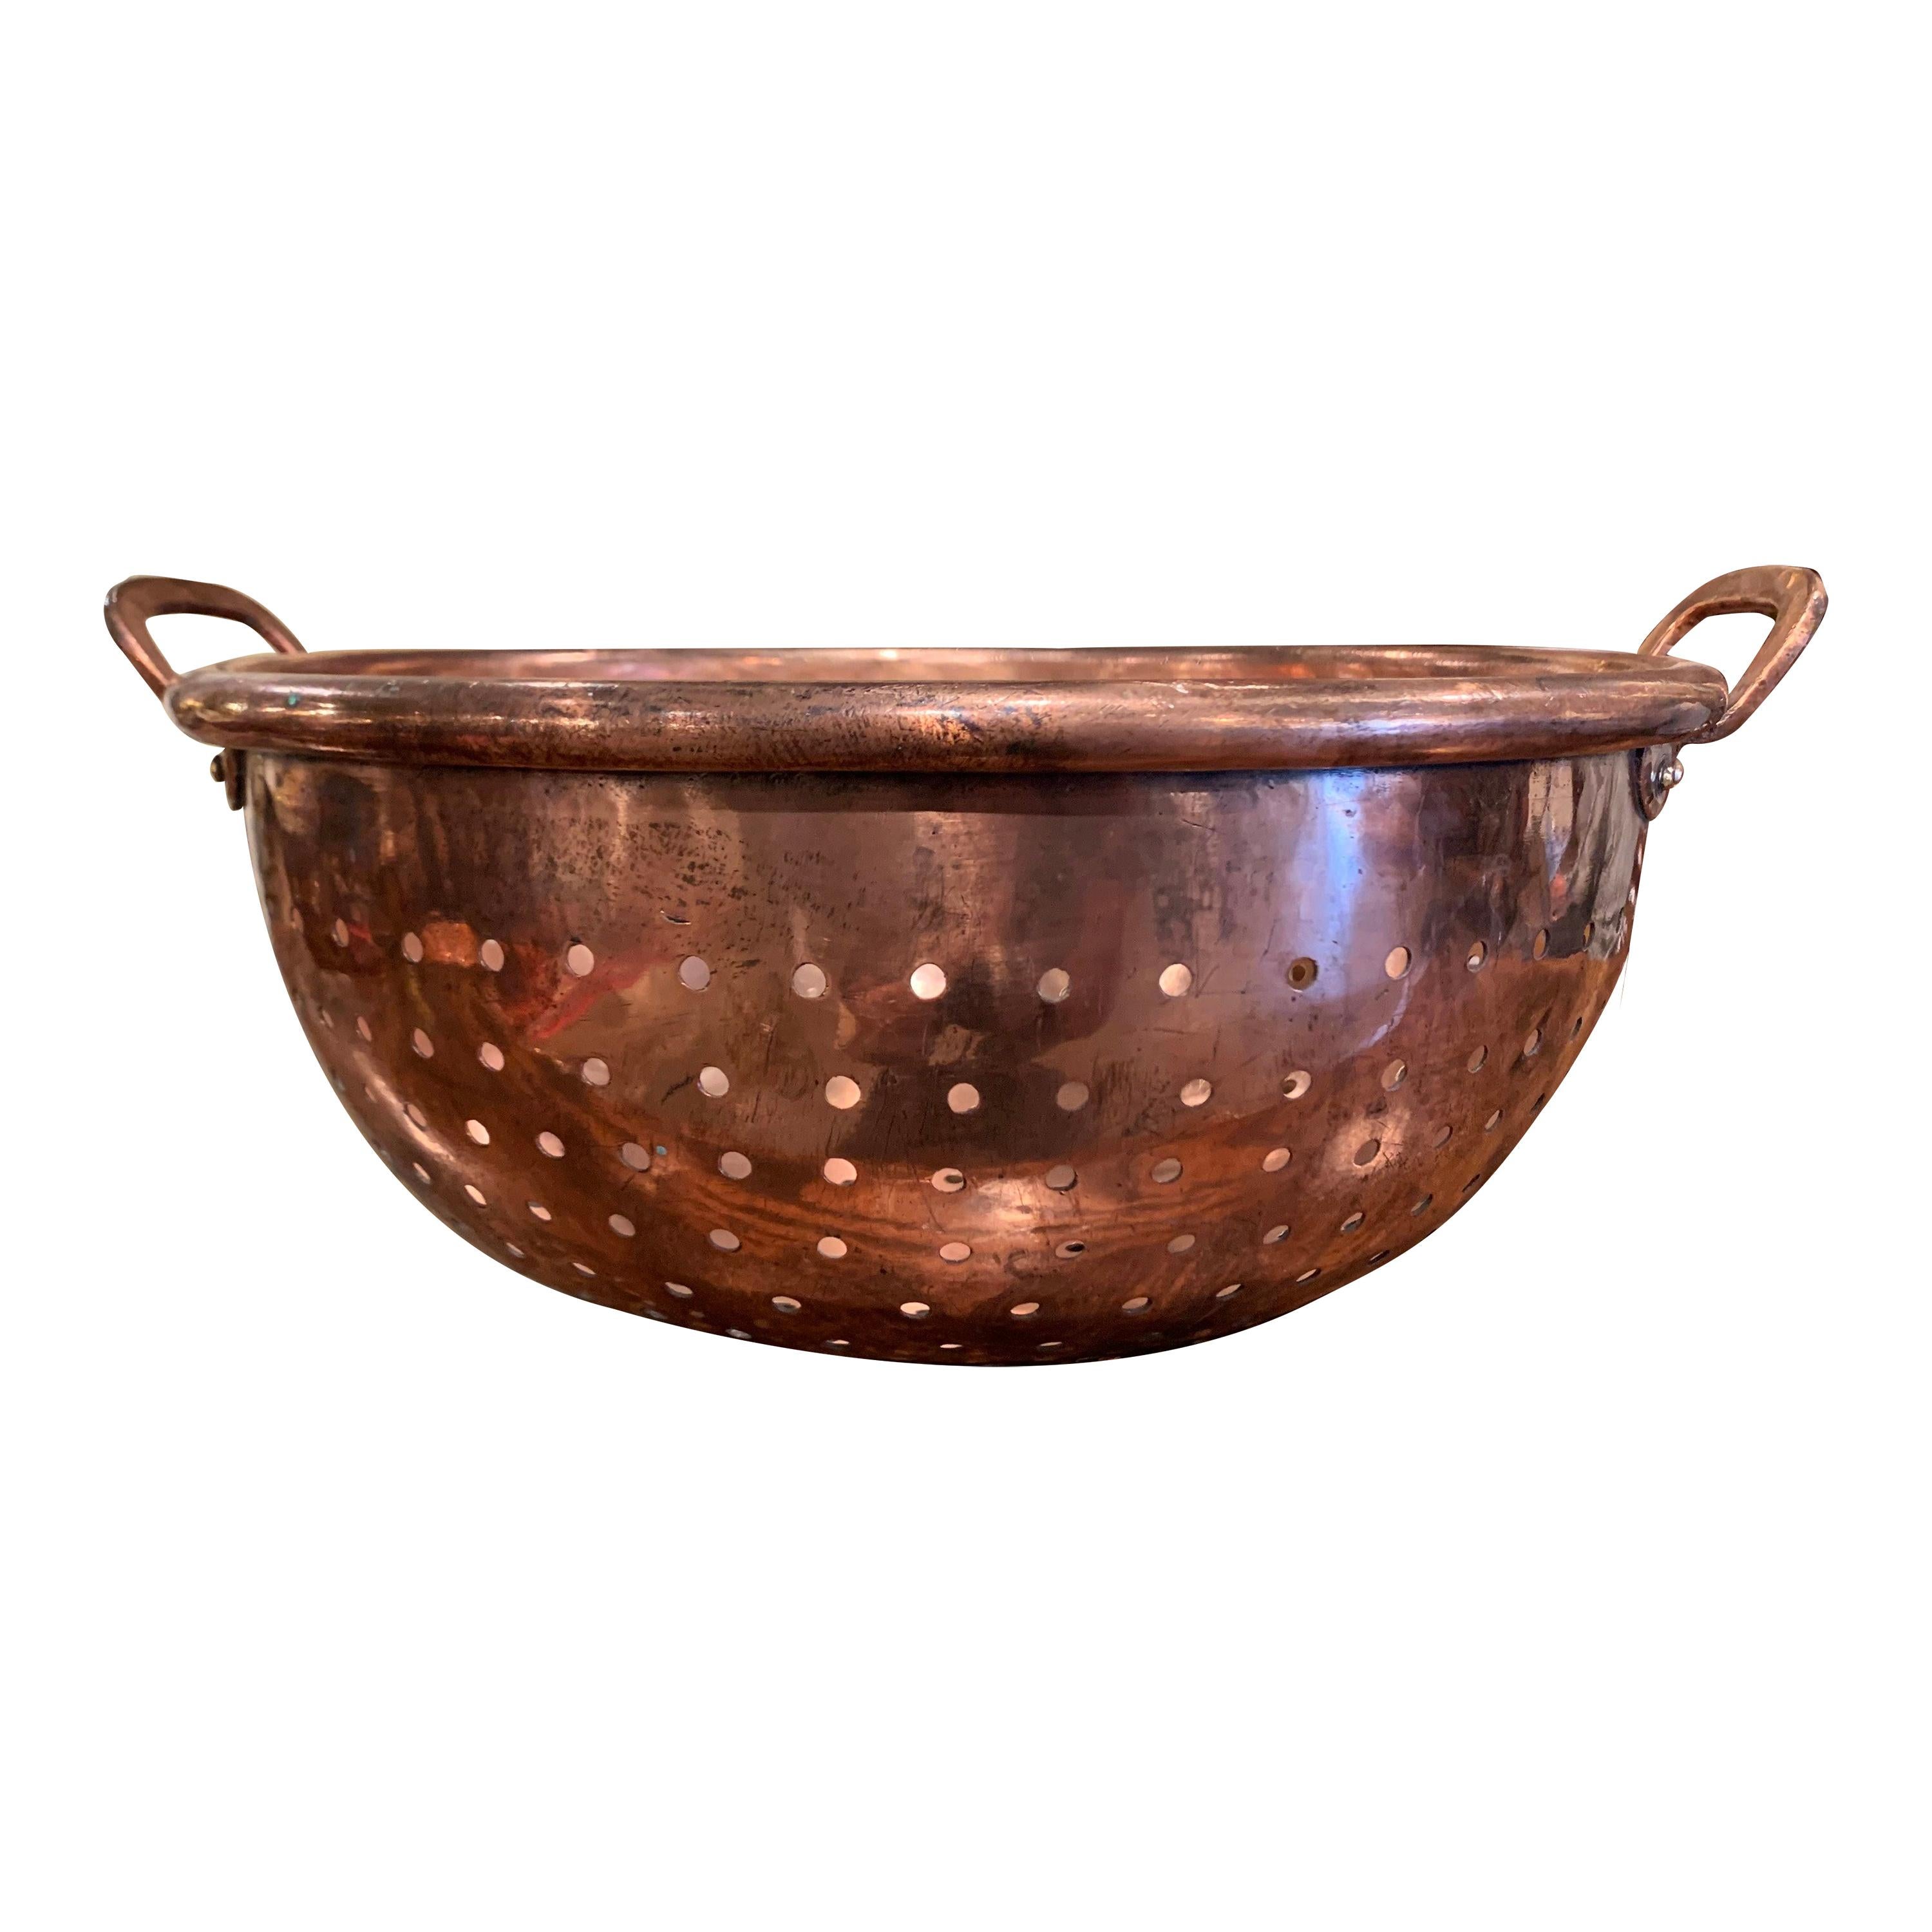 19th Century French Polished Copper Colender Dish from Normandy